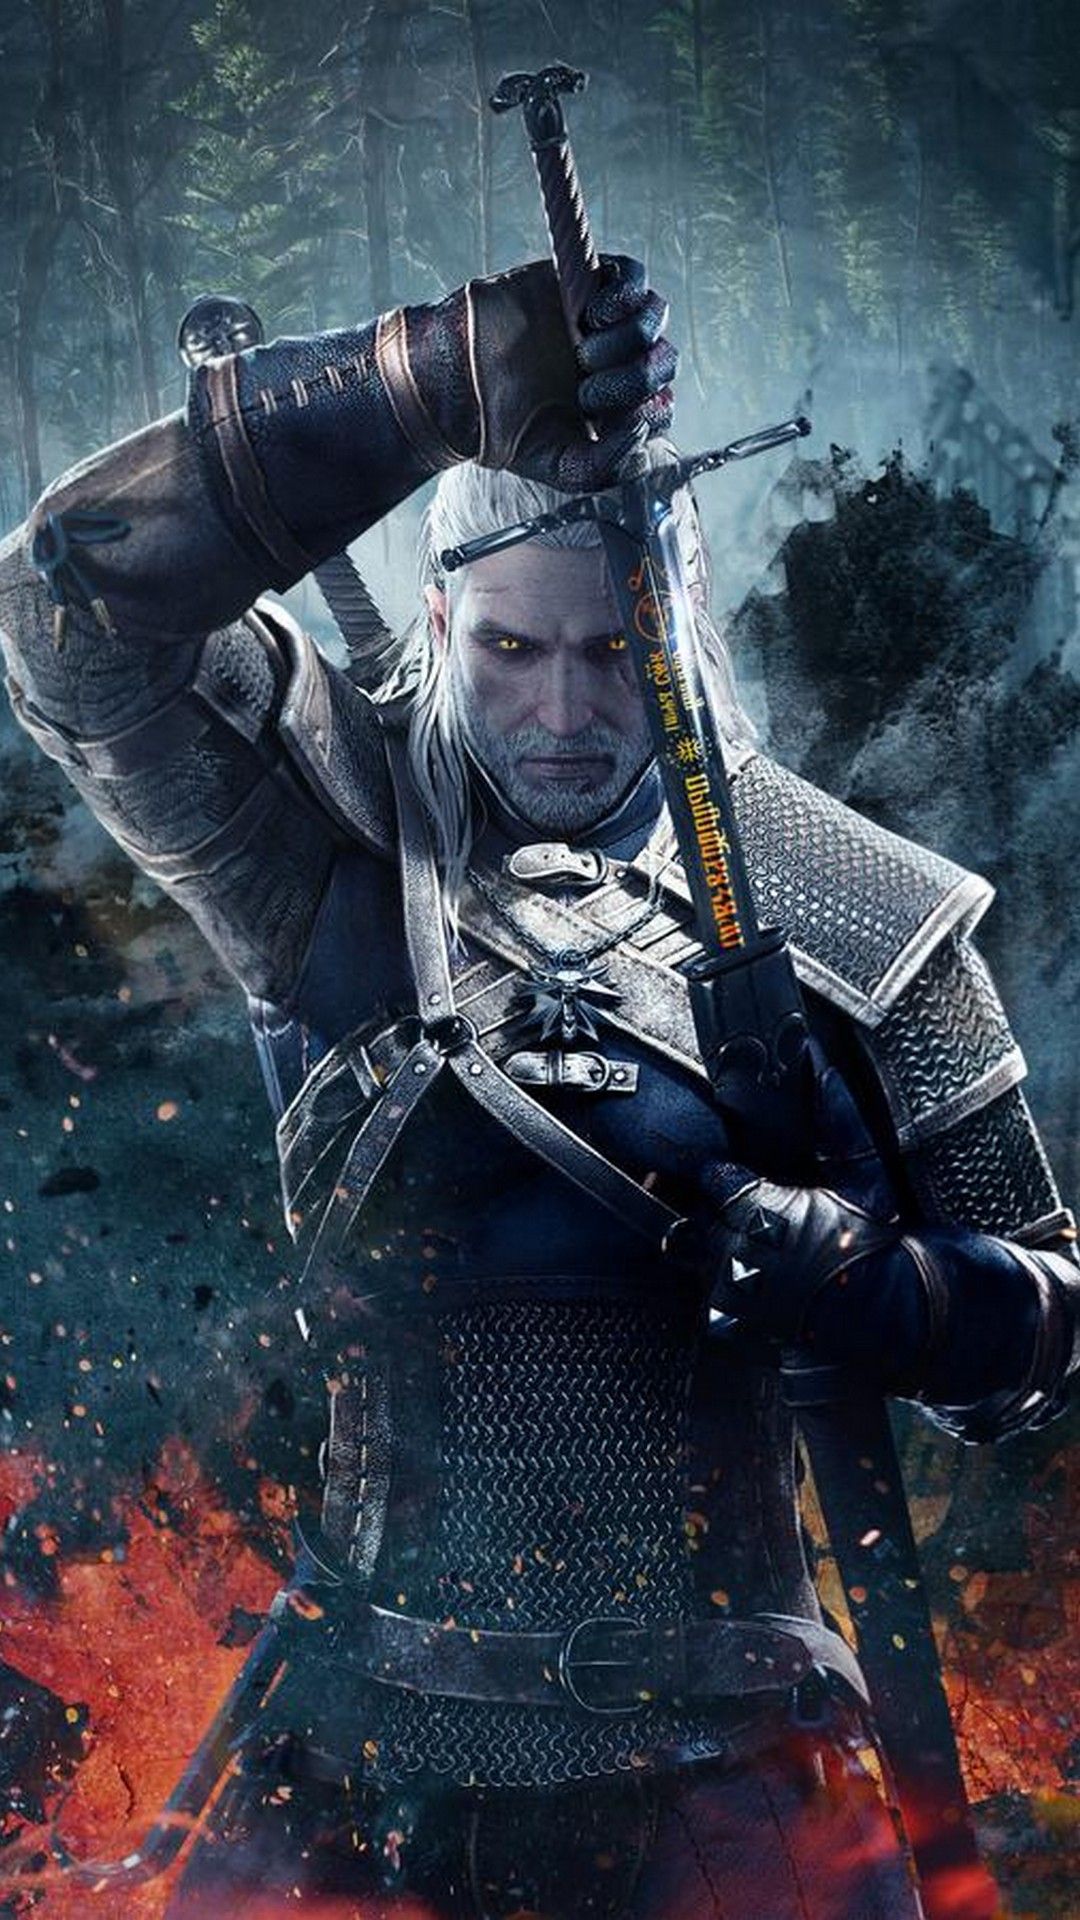 The Witcher Netflix Poster Wallpapers